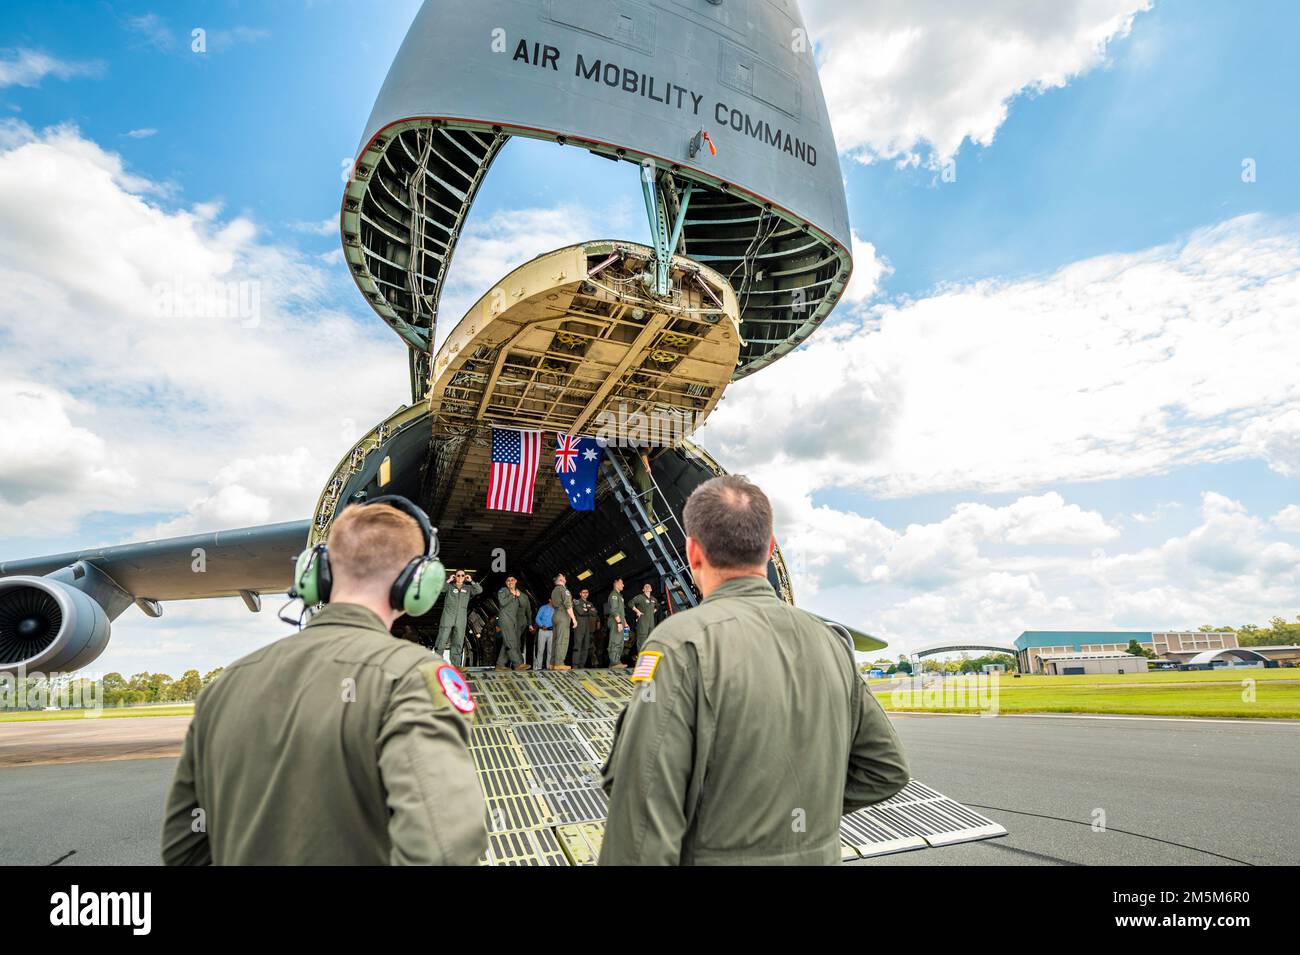 Members of the Australian Defence Force tour a U.S. Air Force C-5M Super Galaxy assigned to the 22nd Airlift Squadron at Travis Air Force Base, California, during a visit to Royal Australian Air Force Base Amberley, Australia, March 24, 2022. The 22nd AS commemorated the 80th anniversary of its establishment with a visit to RAAF Base Amberley March 23-27, 2022. The squadron was established April 3, 1942, as the 22nd Transport Squadron at Essendon Airport in Melbourne, Australia, coinciding with the establishment of several RAAF transport squadrons. The visit to RAAF Base Amberley allowed USAF Stock Photo